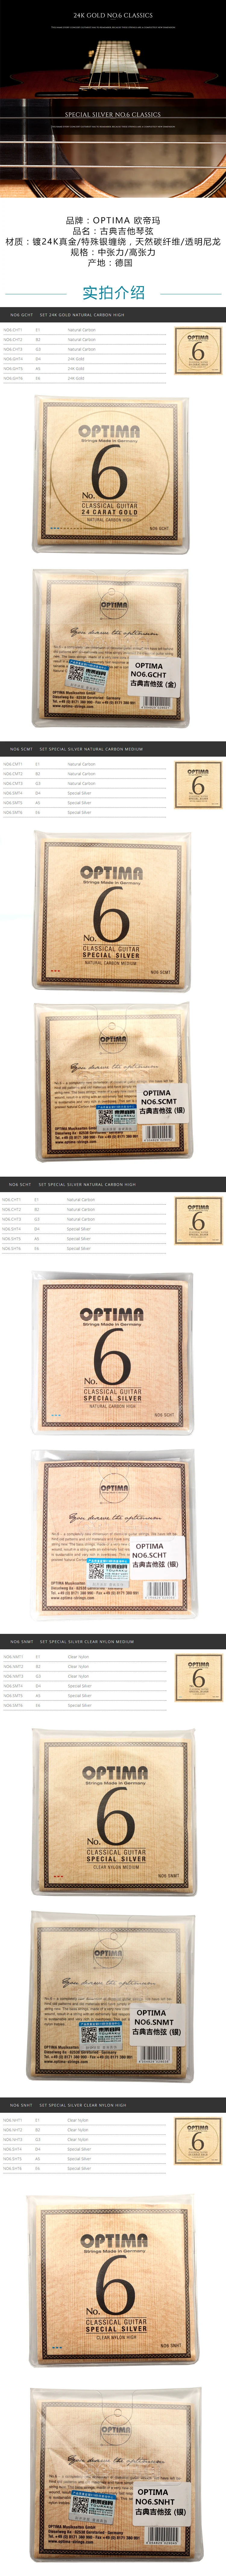 OPTIMA NO.6 24K Gold and Silver Classical Guitar Strings|classical guitar  strings|guitar stringsguitar strings classical - AliExpress